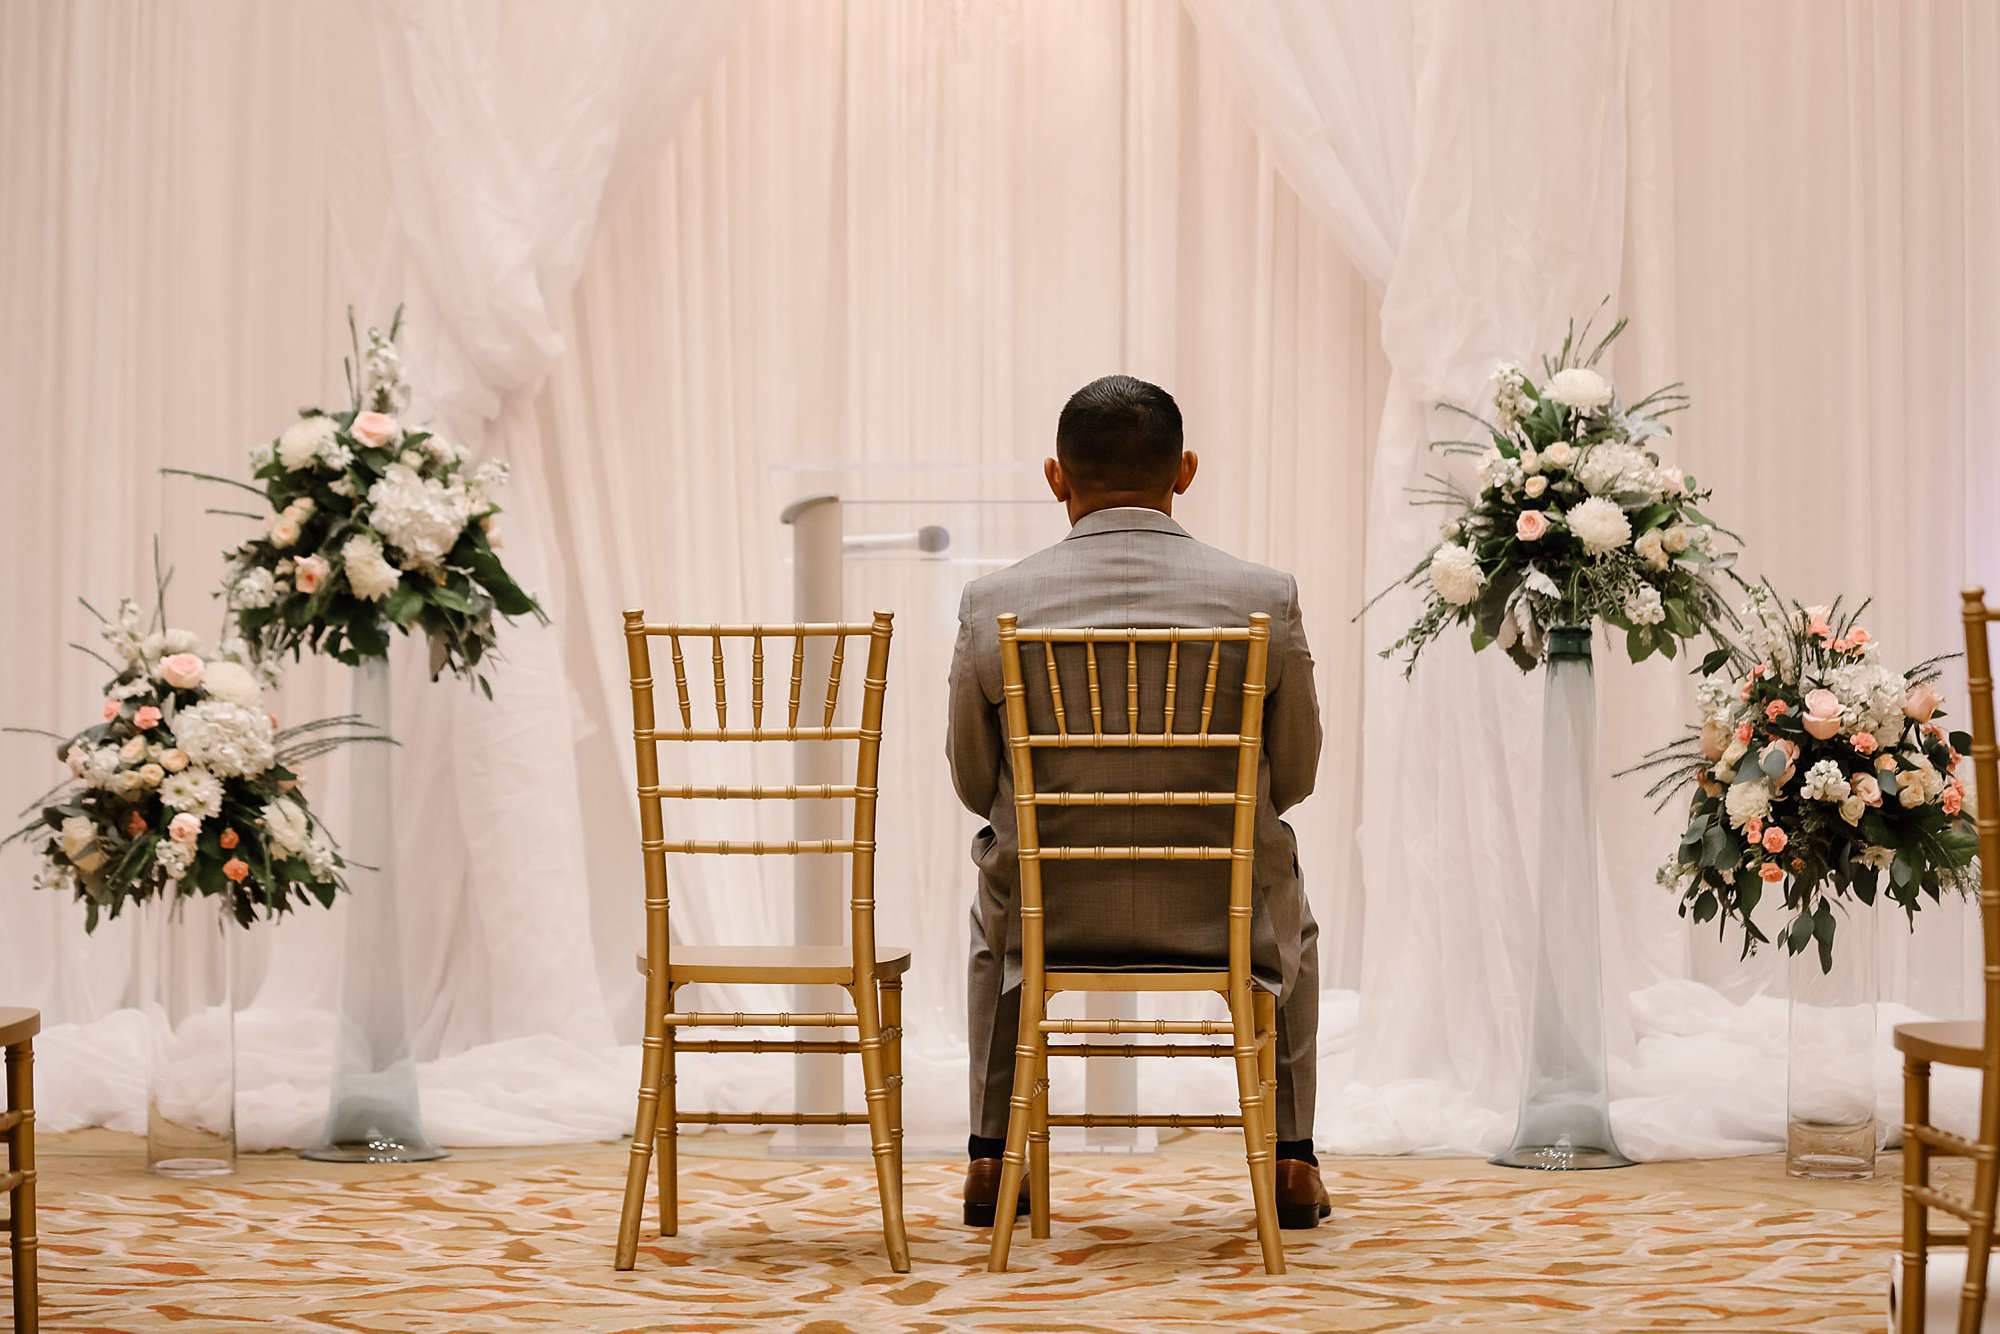 Groom sitting in a gold bamboo chair in front of the alter waiting for his bride to walk in